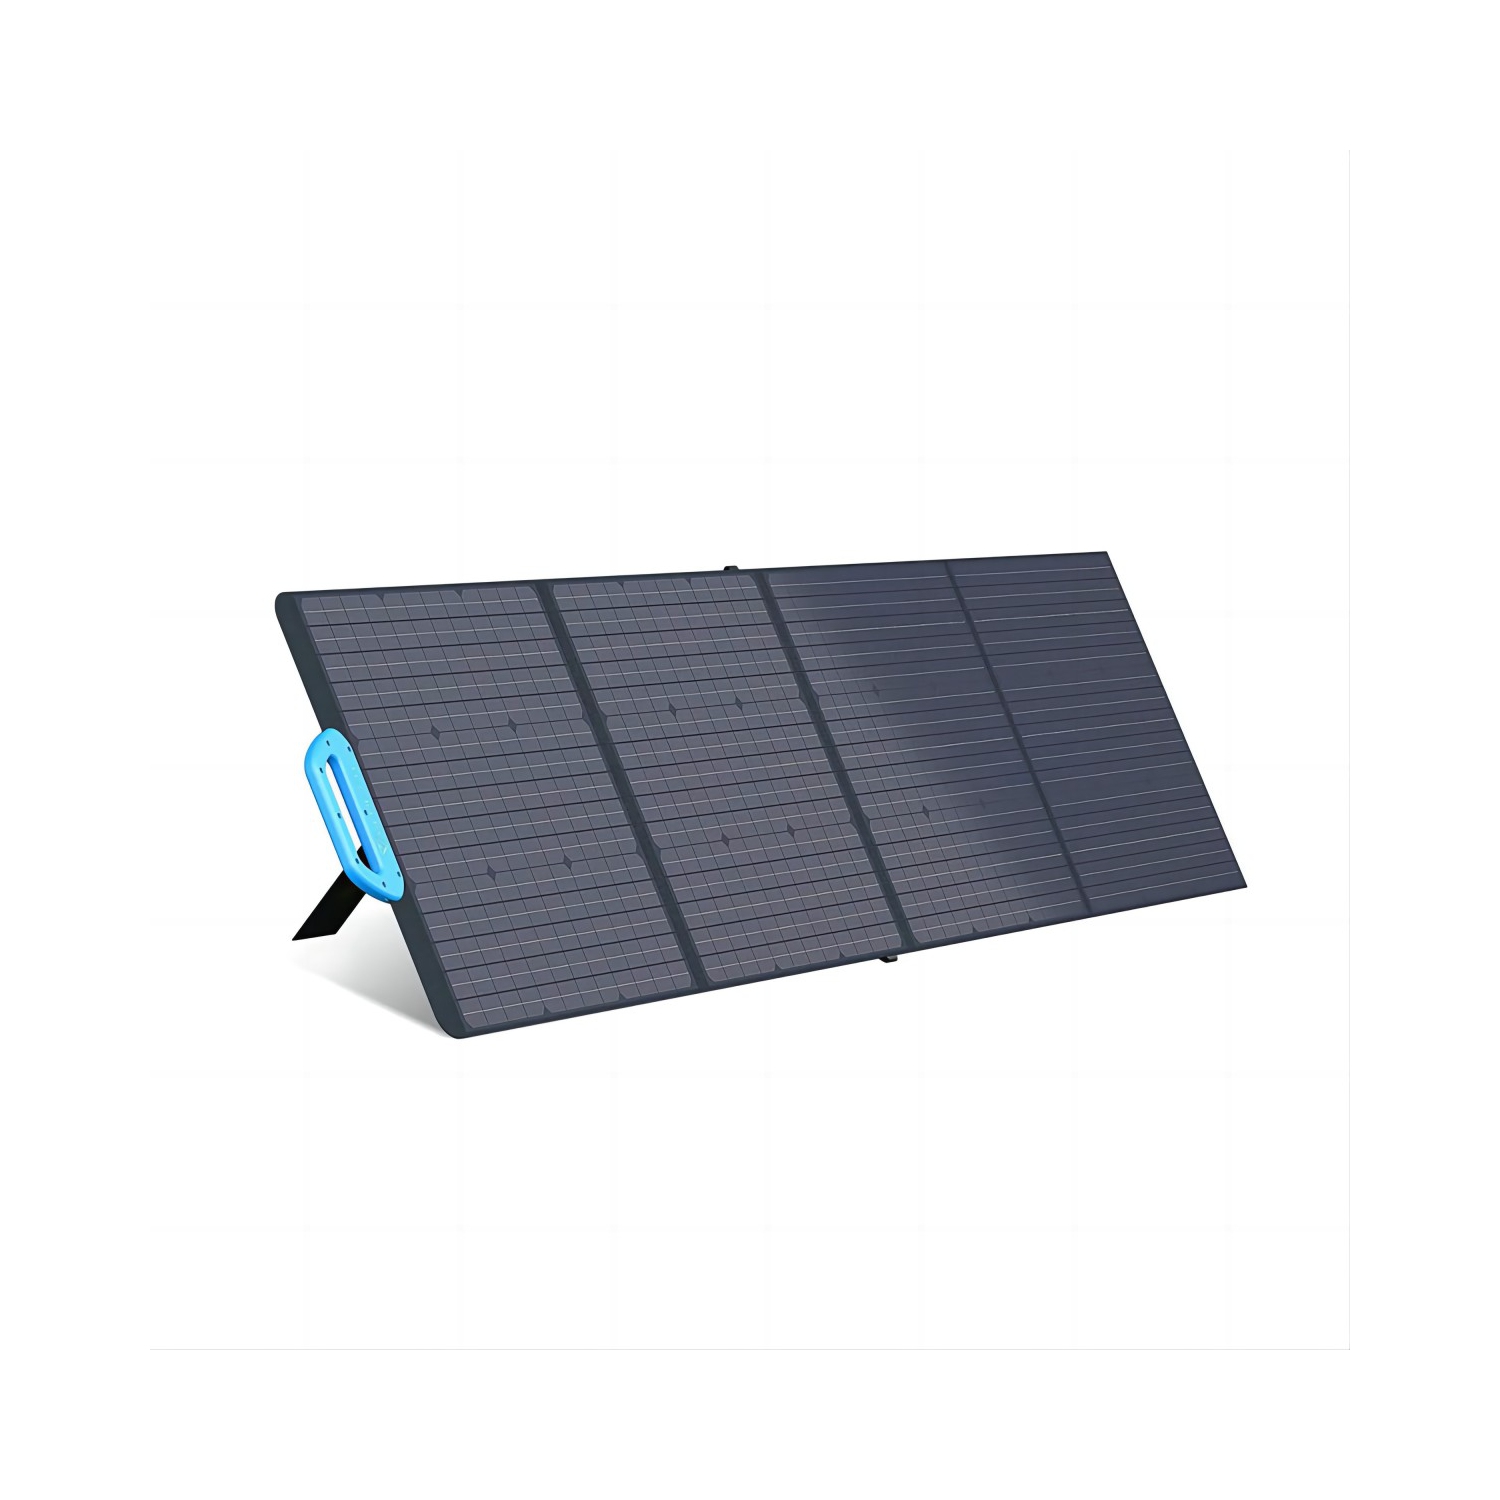 BLUETTI Solar Panel 200W Foldable Solar Power Panel,PV200 for AC200P/Max/EB70S/EB55 Portable Power Stations ,Off-Grid Supplies for Outdoor Camping